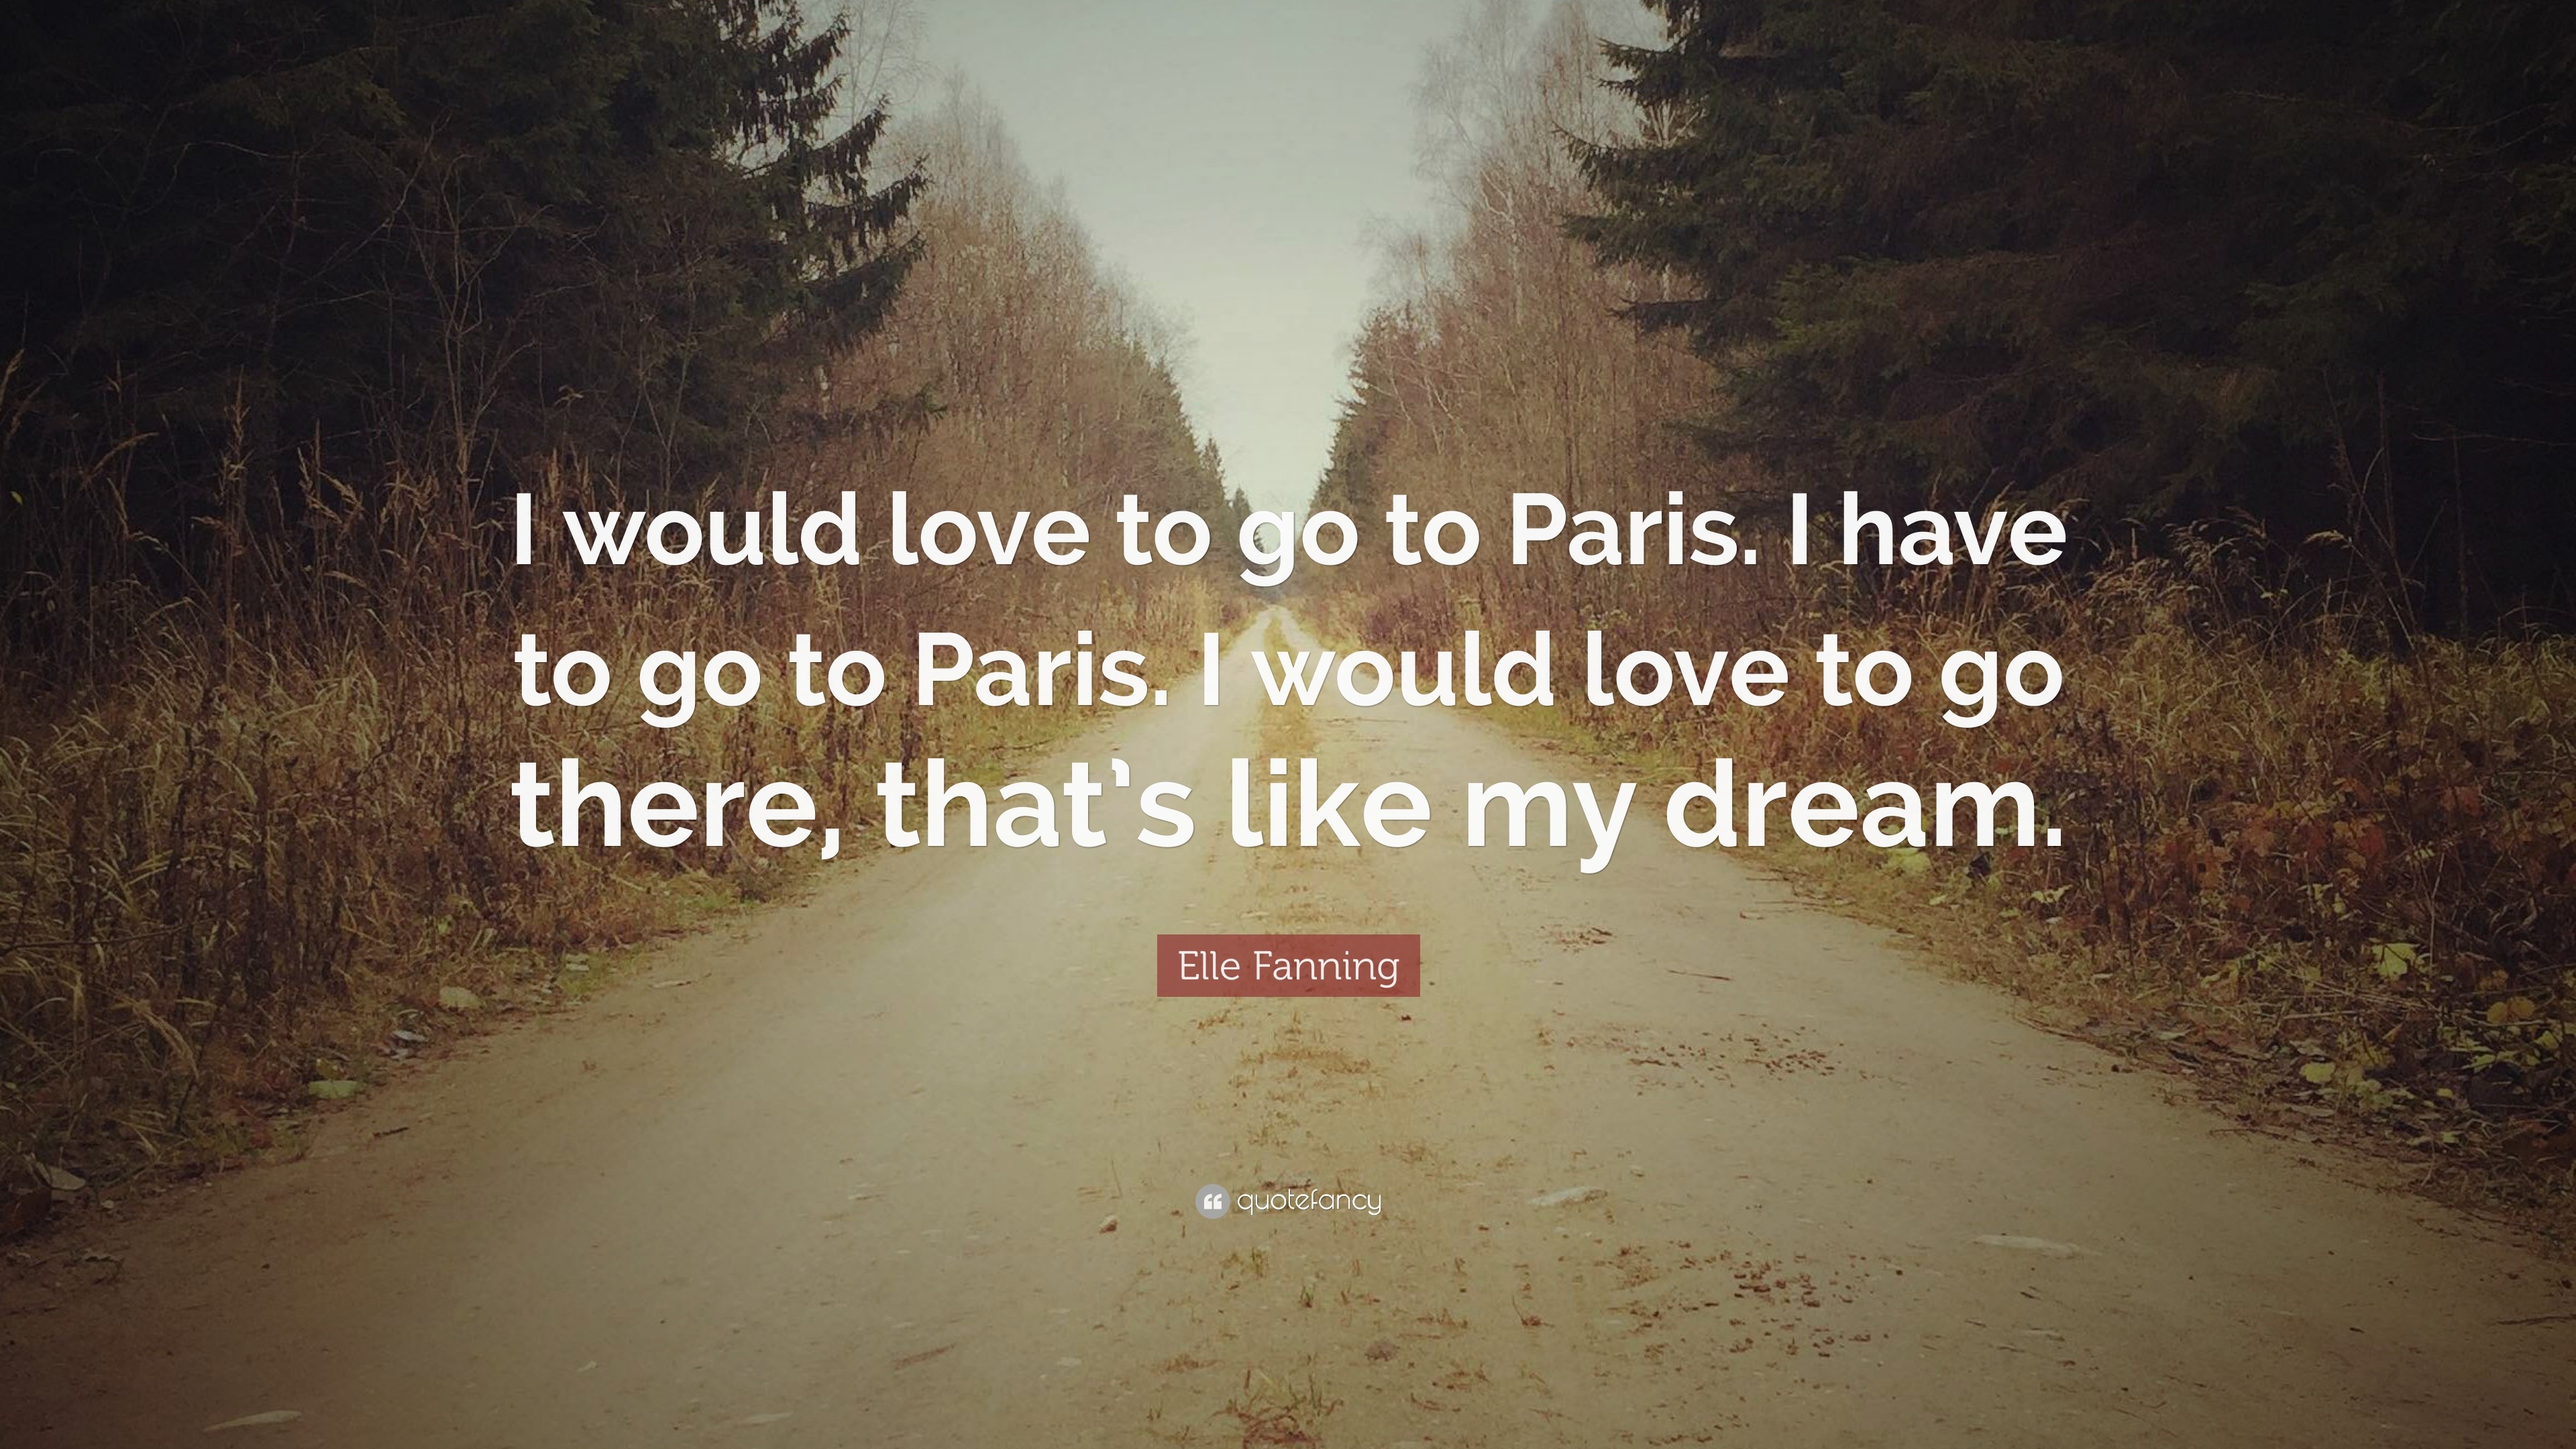 Elle Fanning Quote: “I would love to go to Paris. I have to go to Paris ...